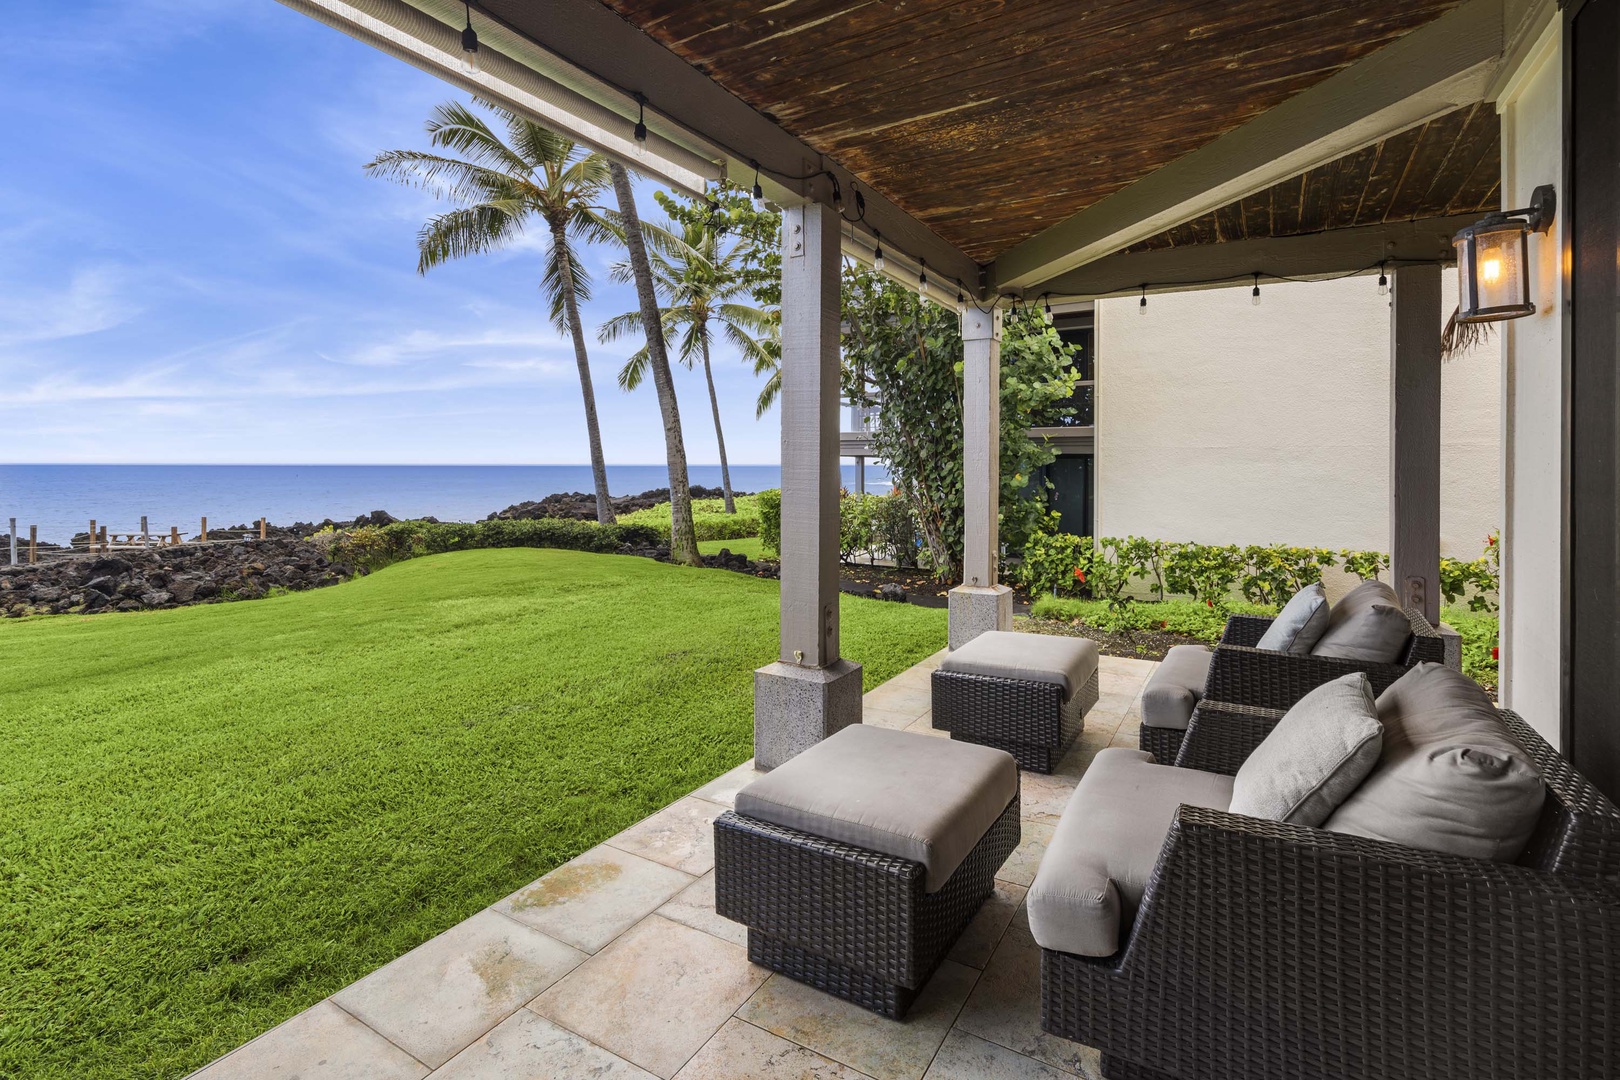 Kailua Kona Vacation Rentals, Keauhou Kona Surf & Racquet 2101 - And on the right are two single seats with ottoman for a more relaxing time in front of the ocean and soaking up with island breeze.